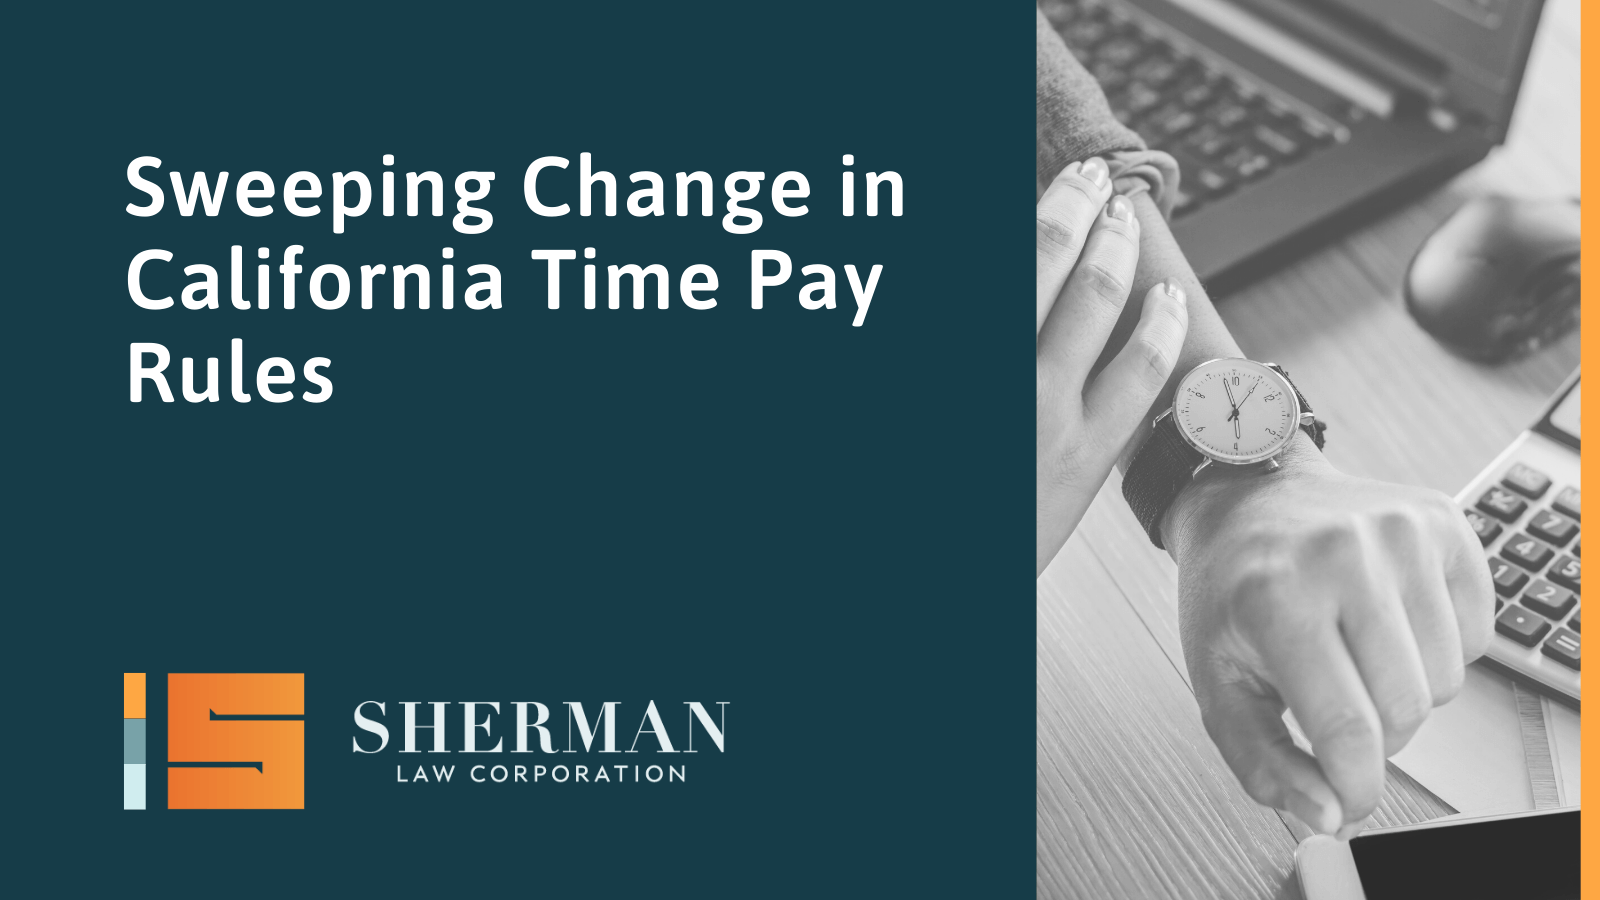 Sweeping Change in California Time Pay Rules - california employment lawyer - sherman law corporation